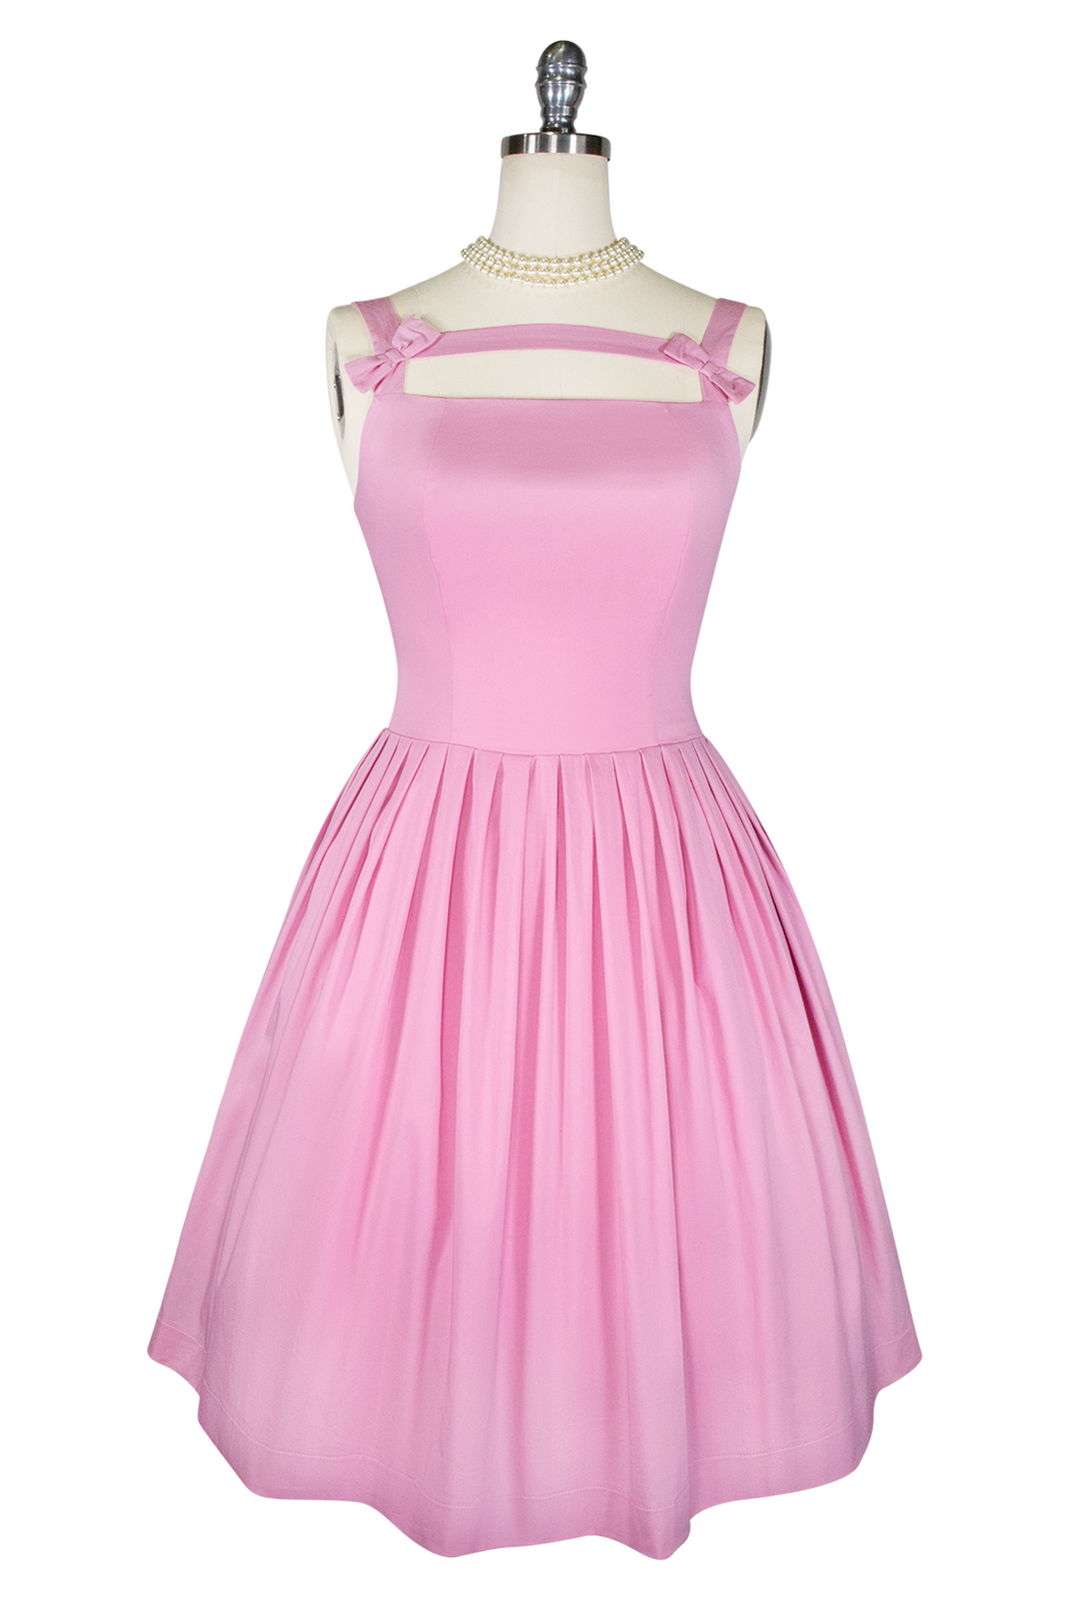 French Vacation Bow Dress - Kitten D'Amour